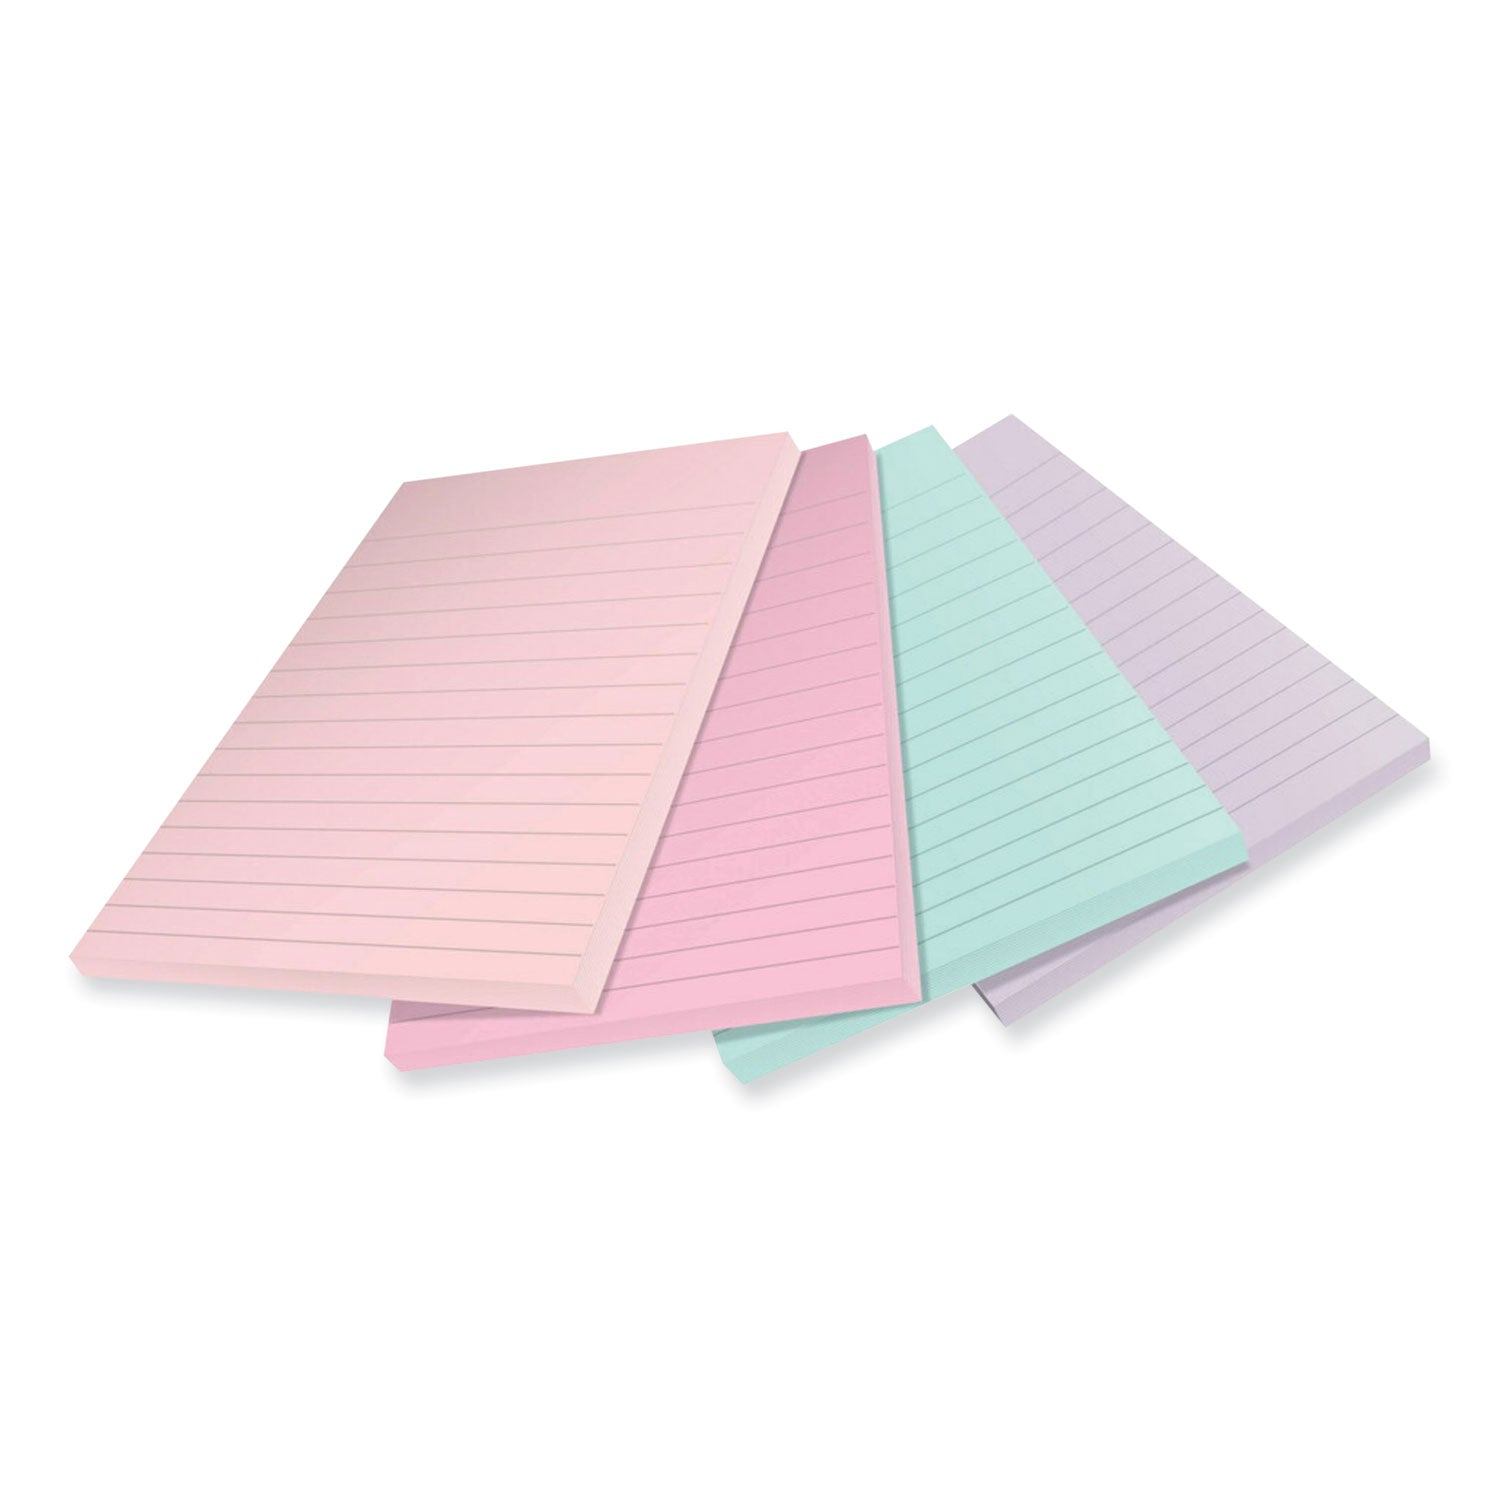 100%-recycled-paper-super-sticky-notes-ruled-4-x-6-wanderlust-pastels-45-sheets-pad-4-pads-pack_mmm4621r4ssnrp - 3